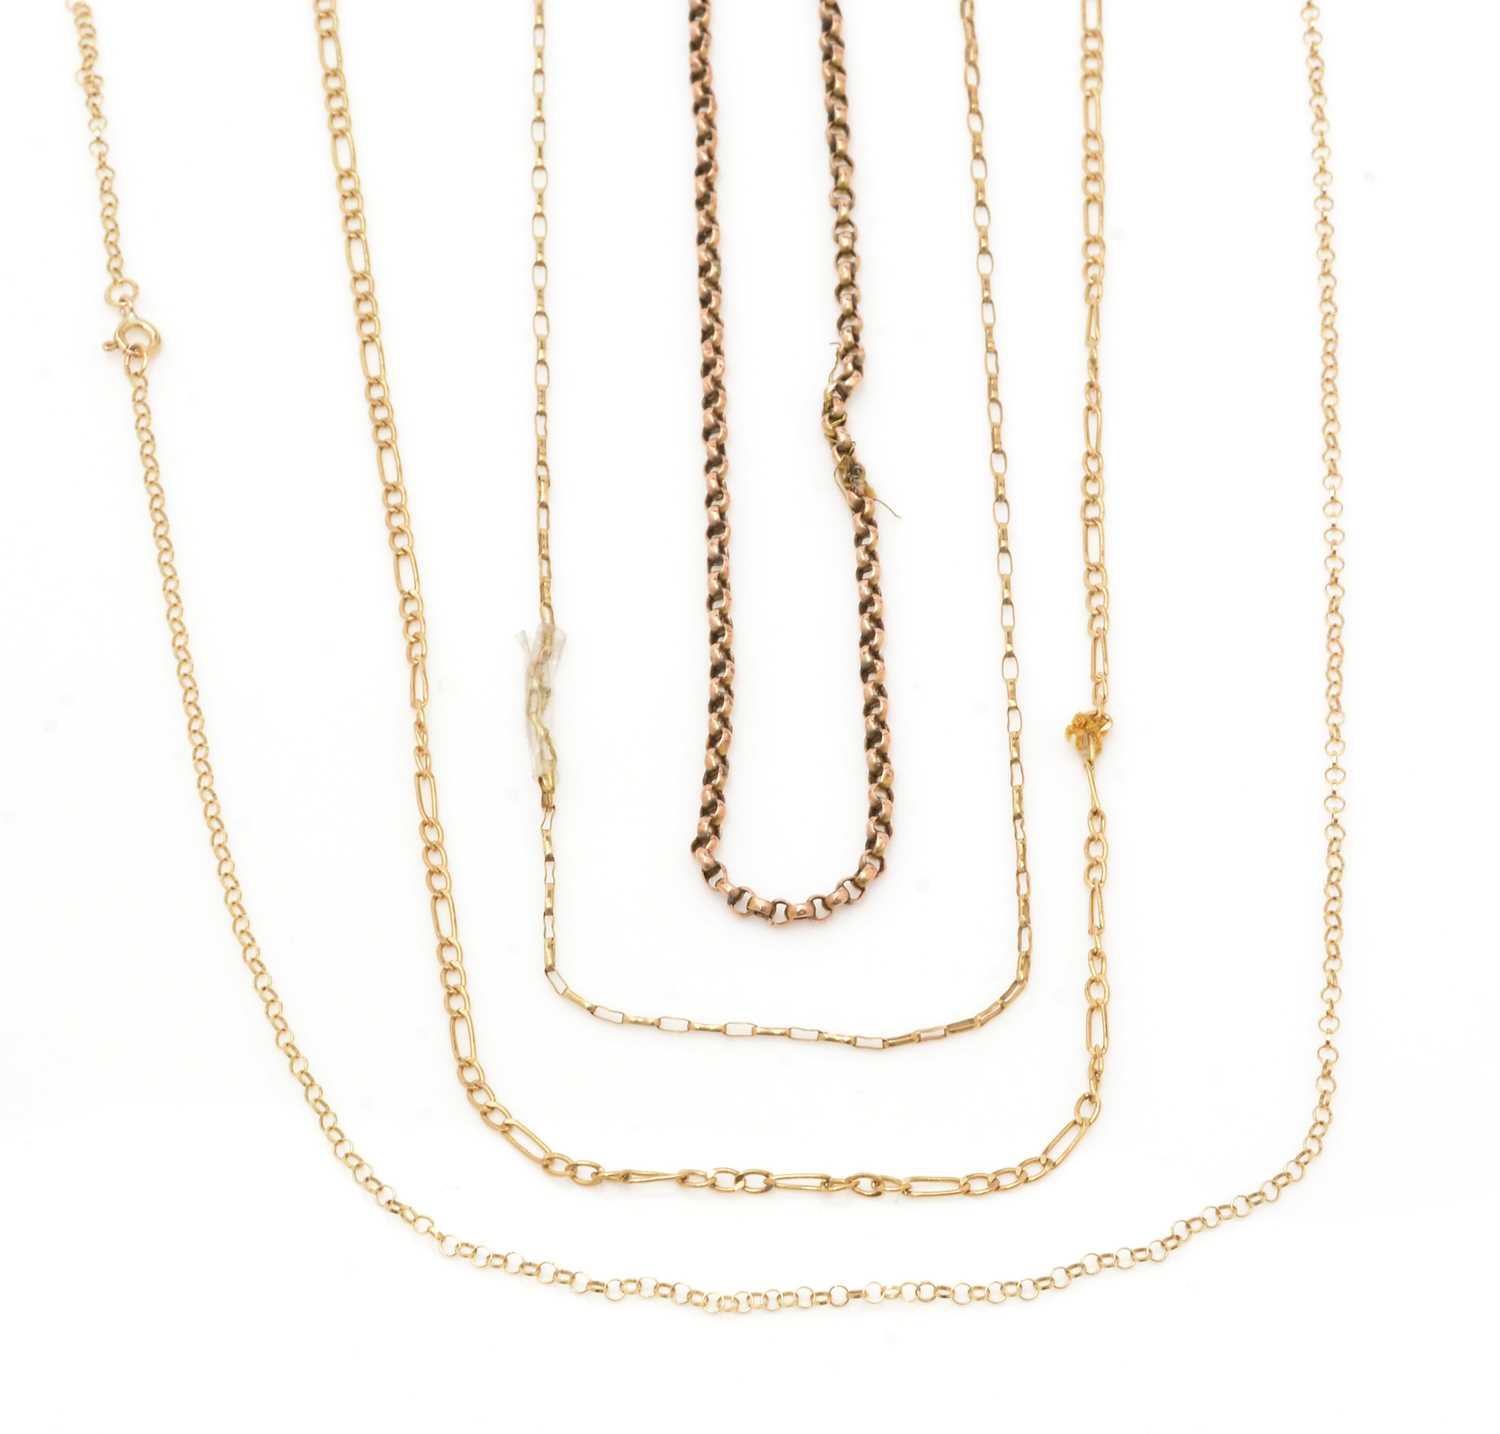 Four 9ct yellow gold chains